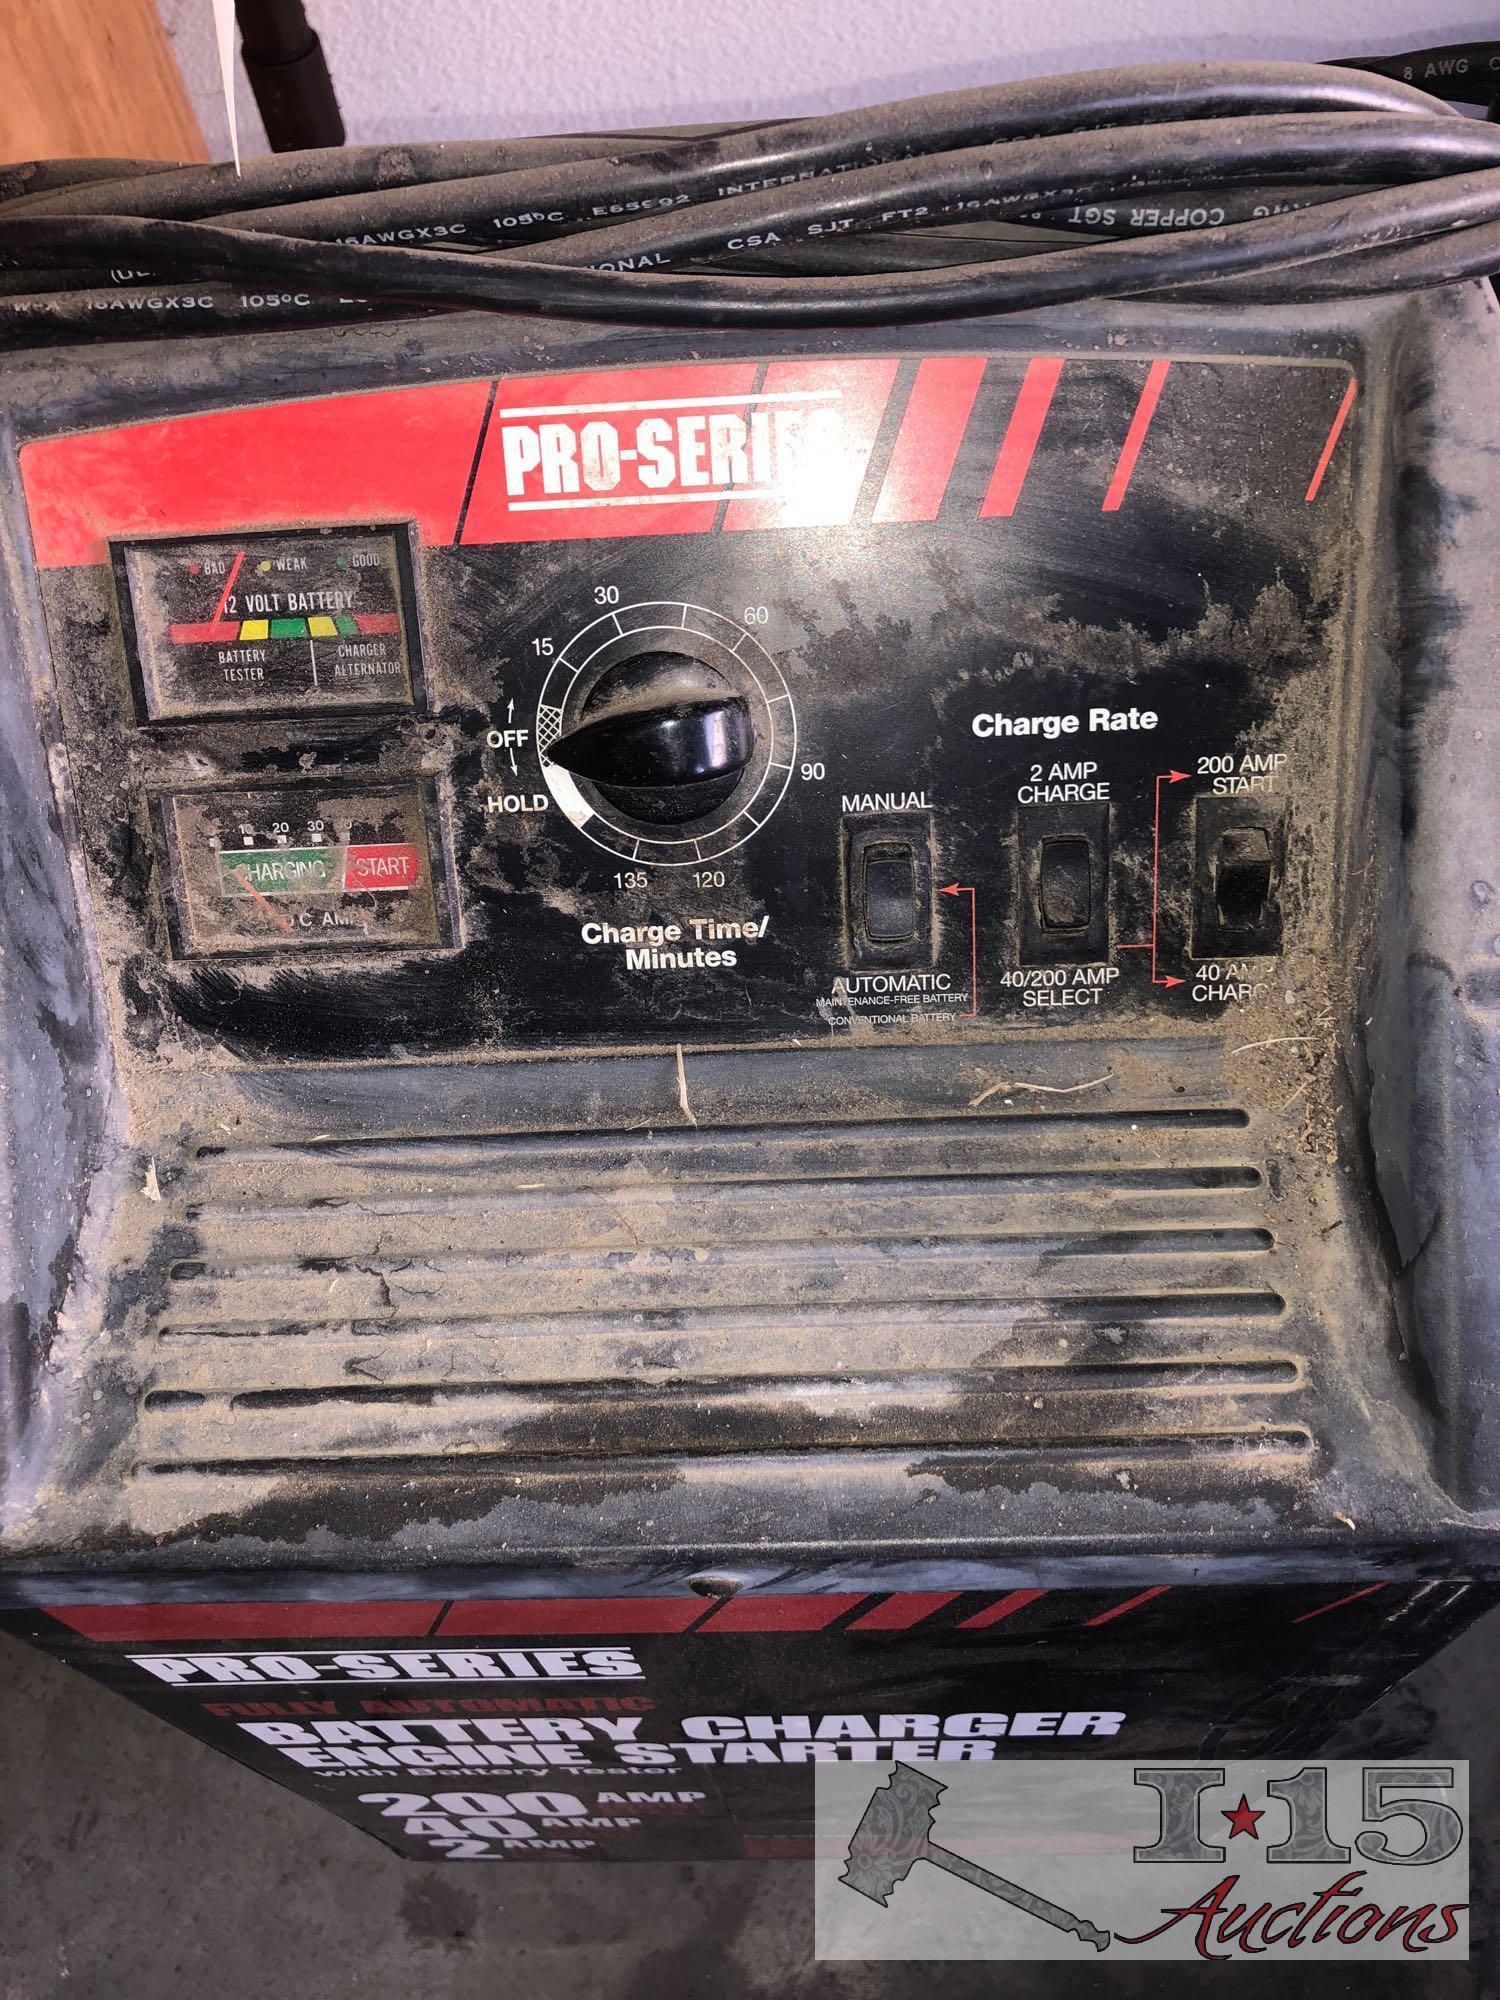 Pro Series Fully Automatic Battery Charger